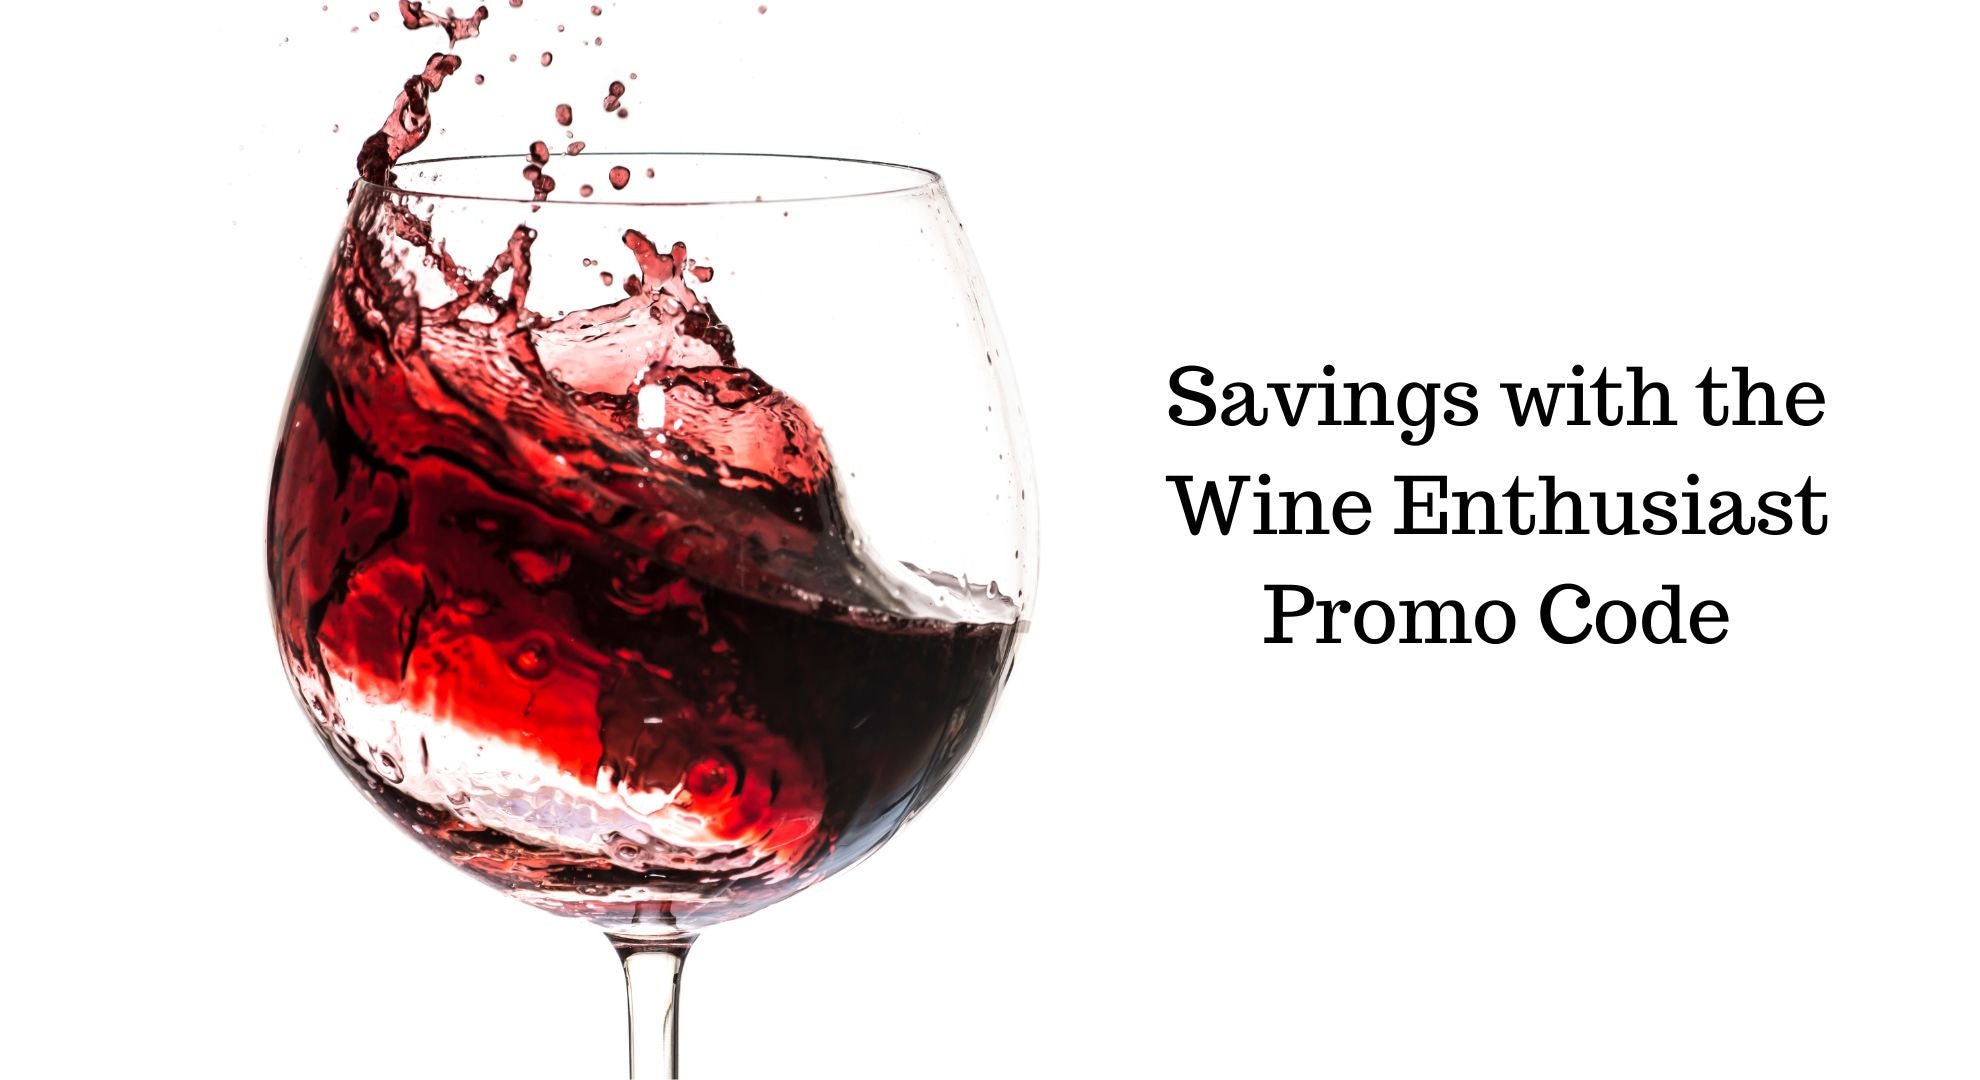 Exclusive Savings with the Wine Enthusiast Promo Code